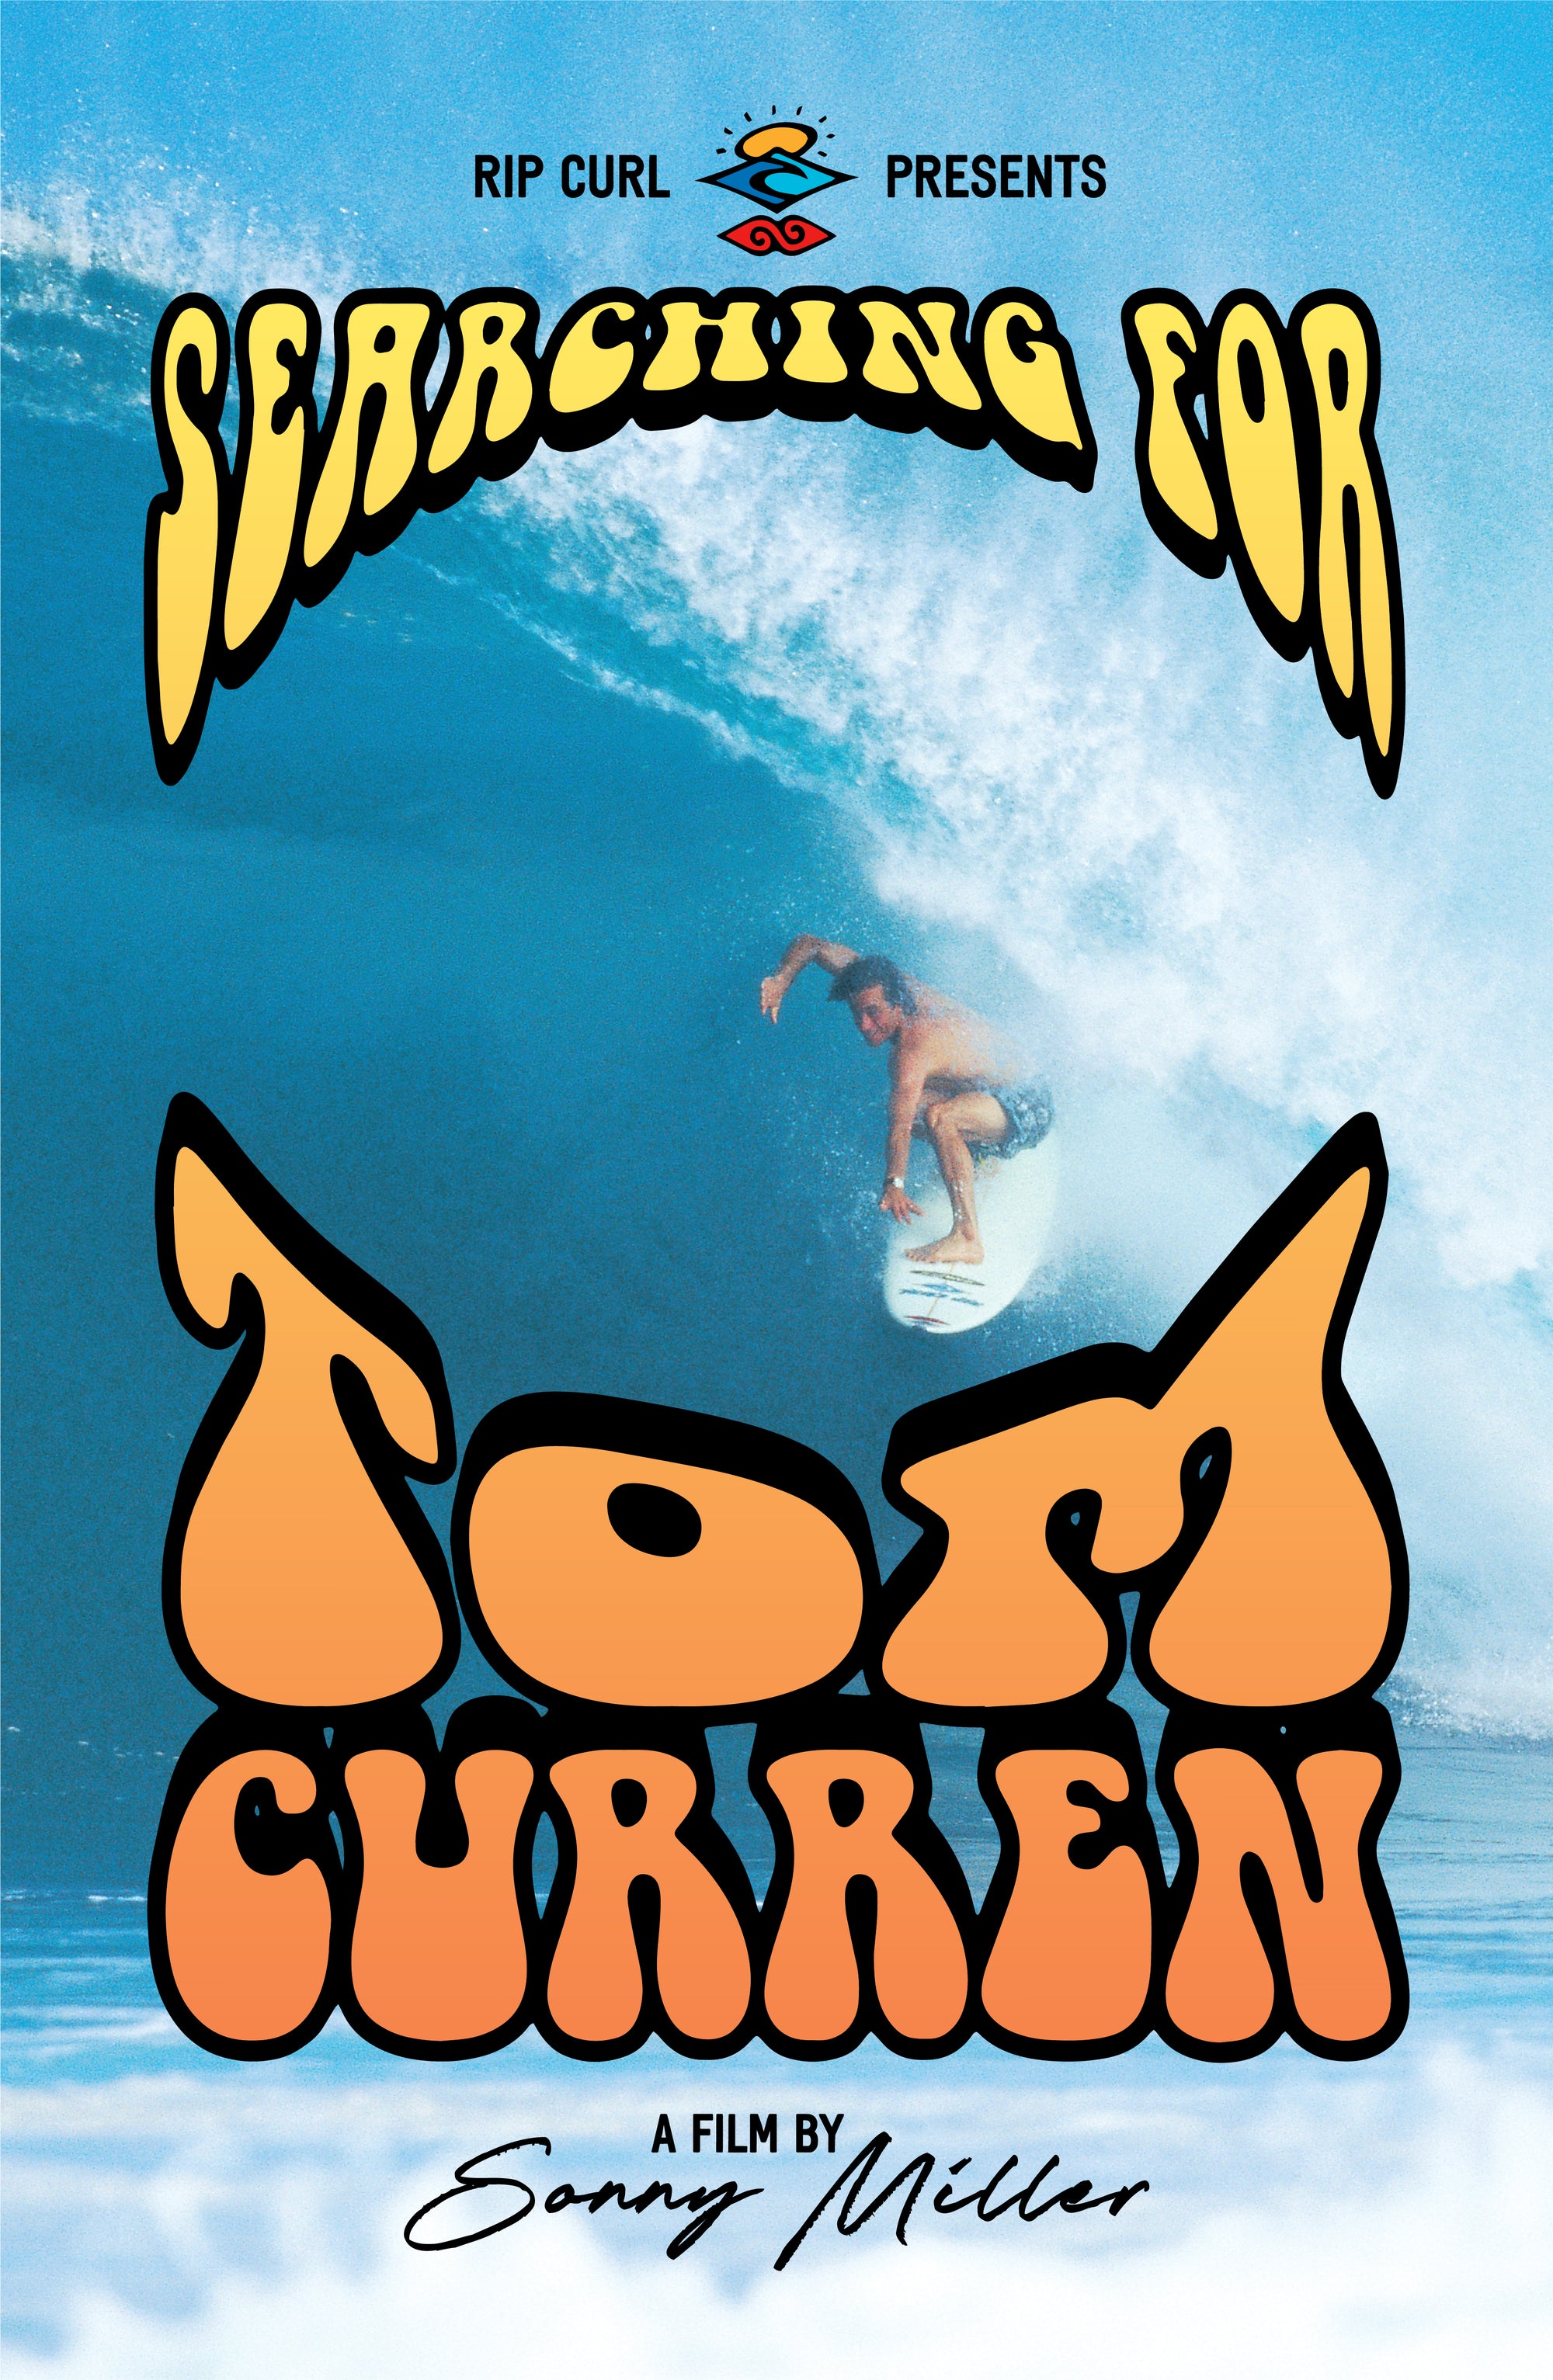 Searching for Tom Curren Stickers